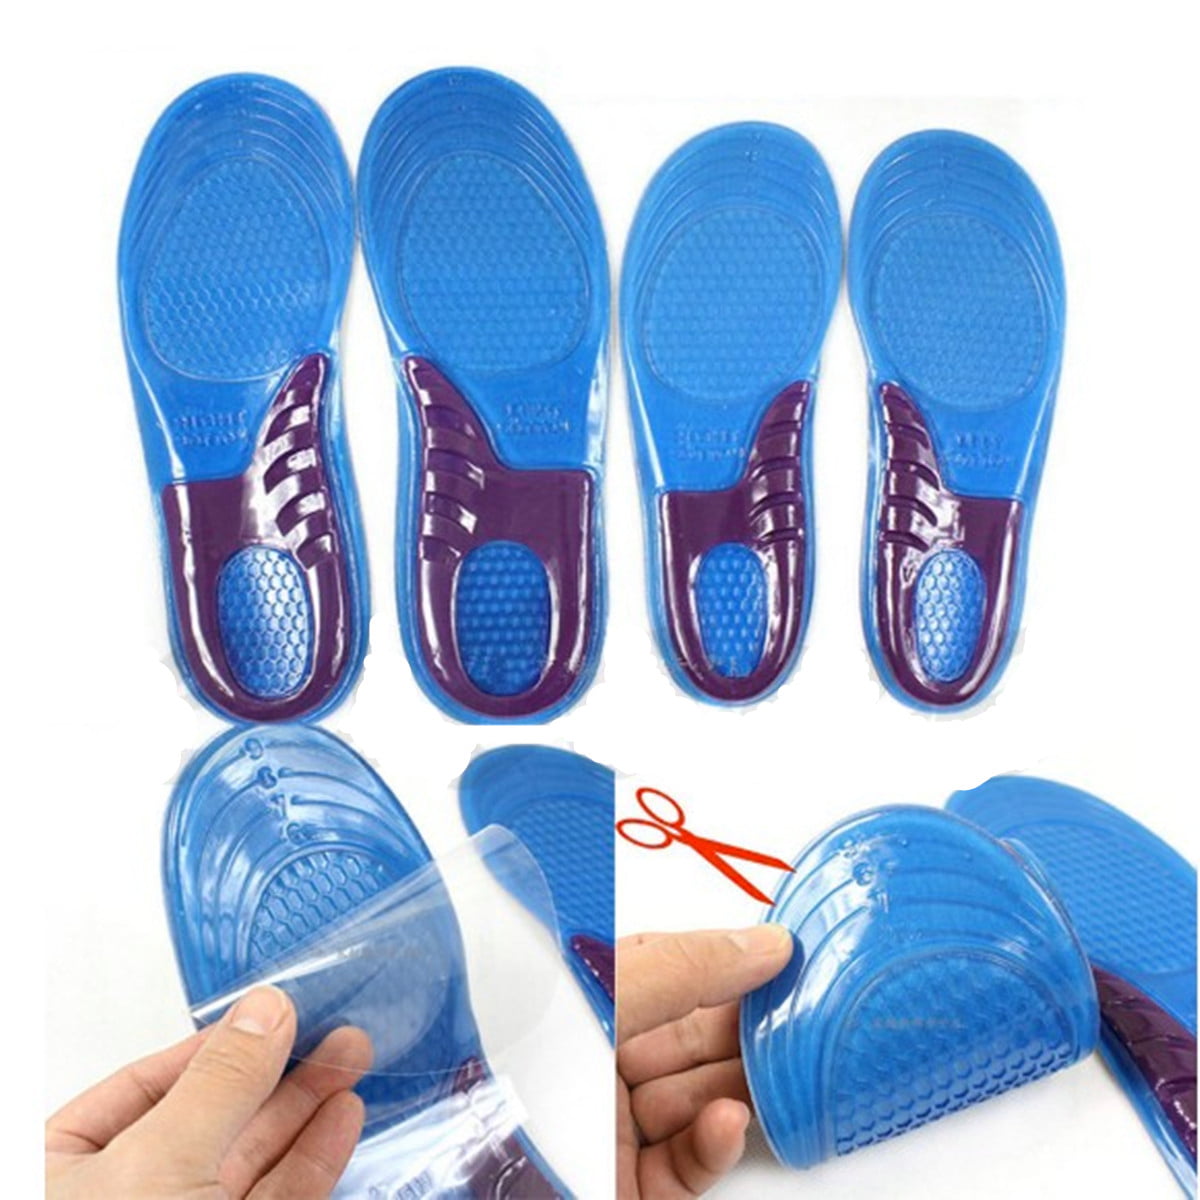 Large Hiking Running Shoe Inserts for Walking Gel Insoles 